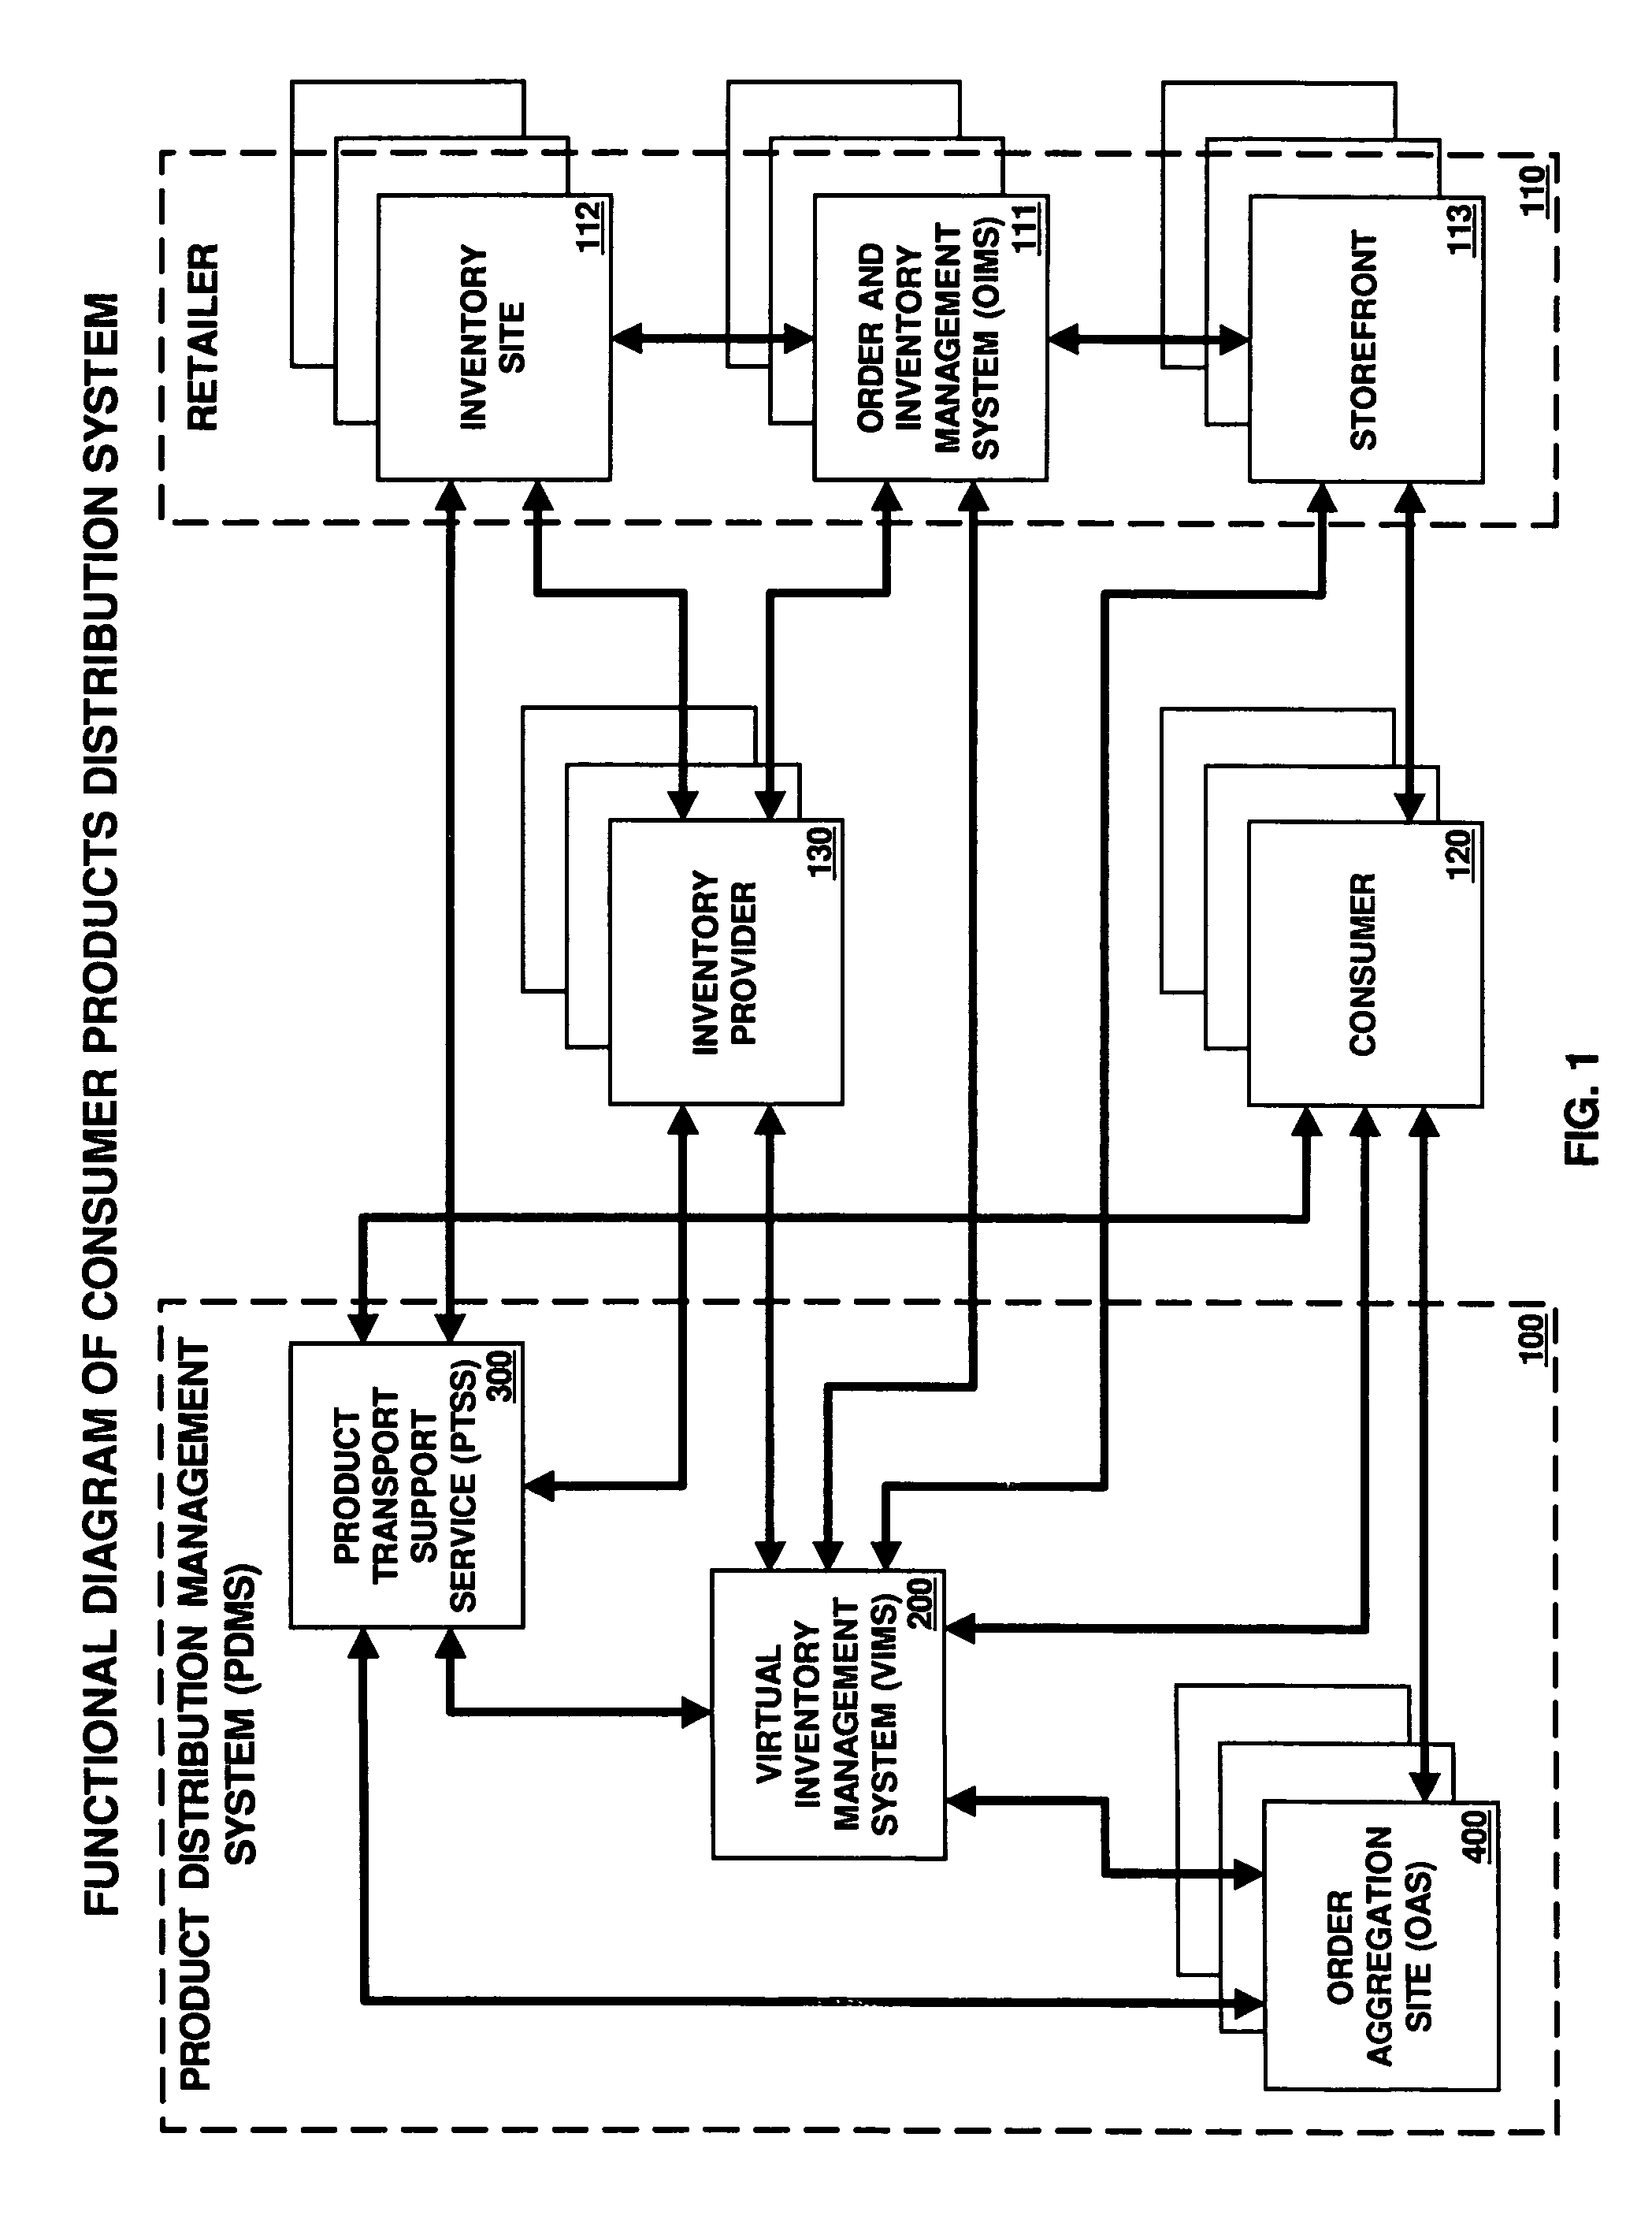 Consumer products distribution system